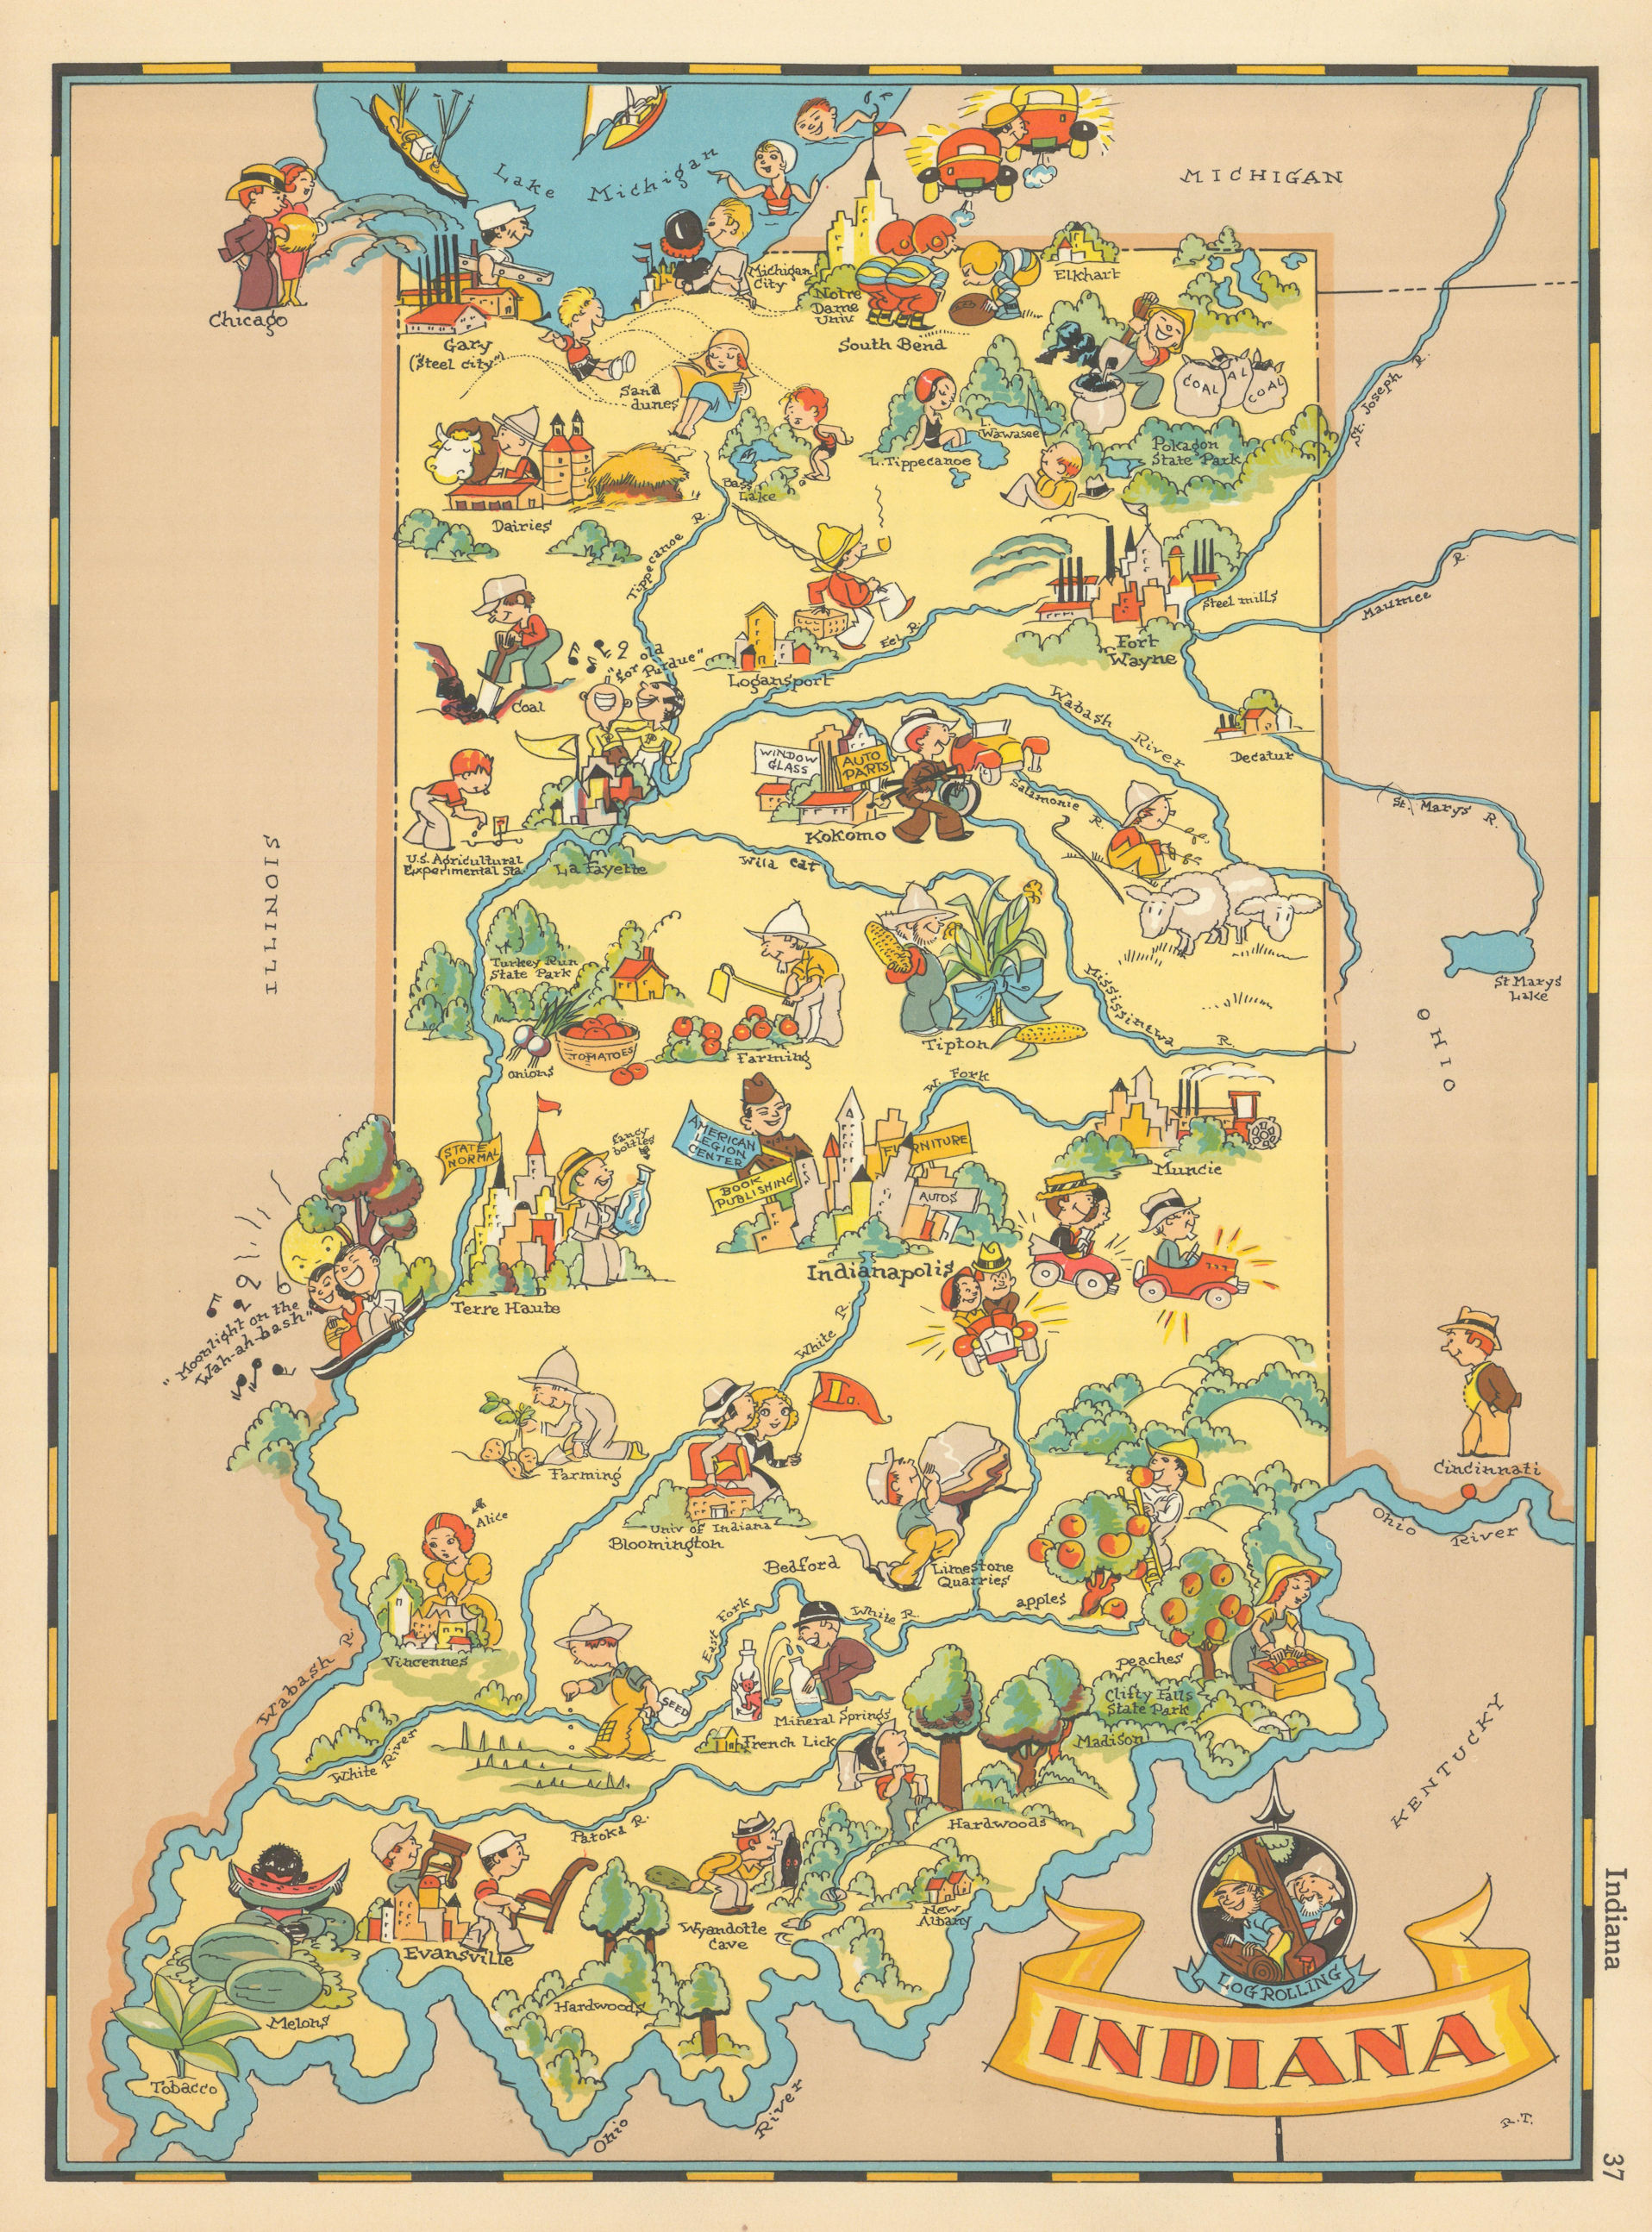 Associate Product Indiana. Pictorial state map by Ruth Taylor White 1935 old vintage chart